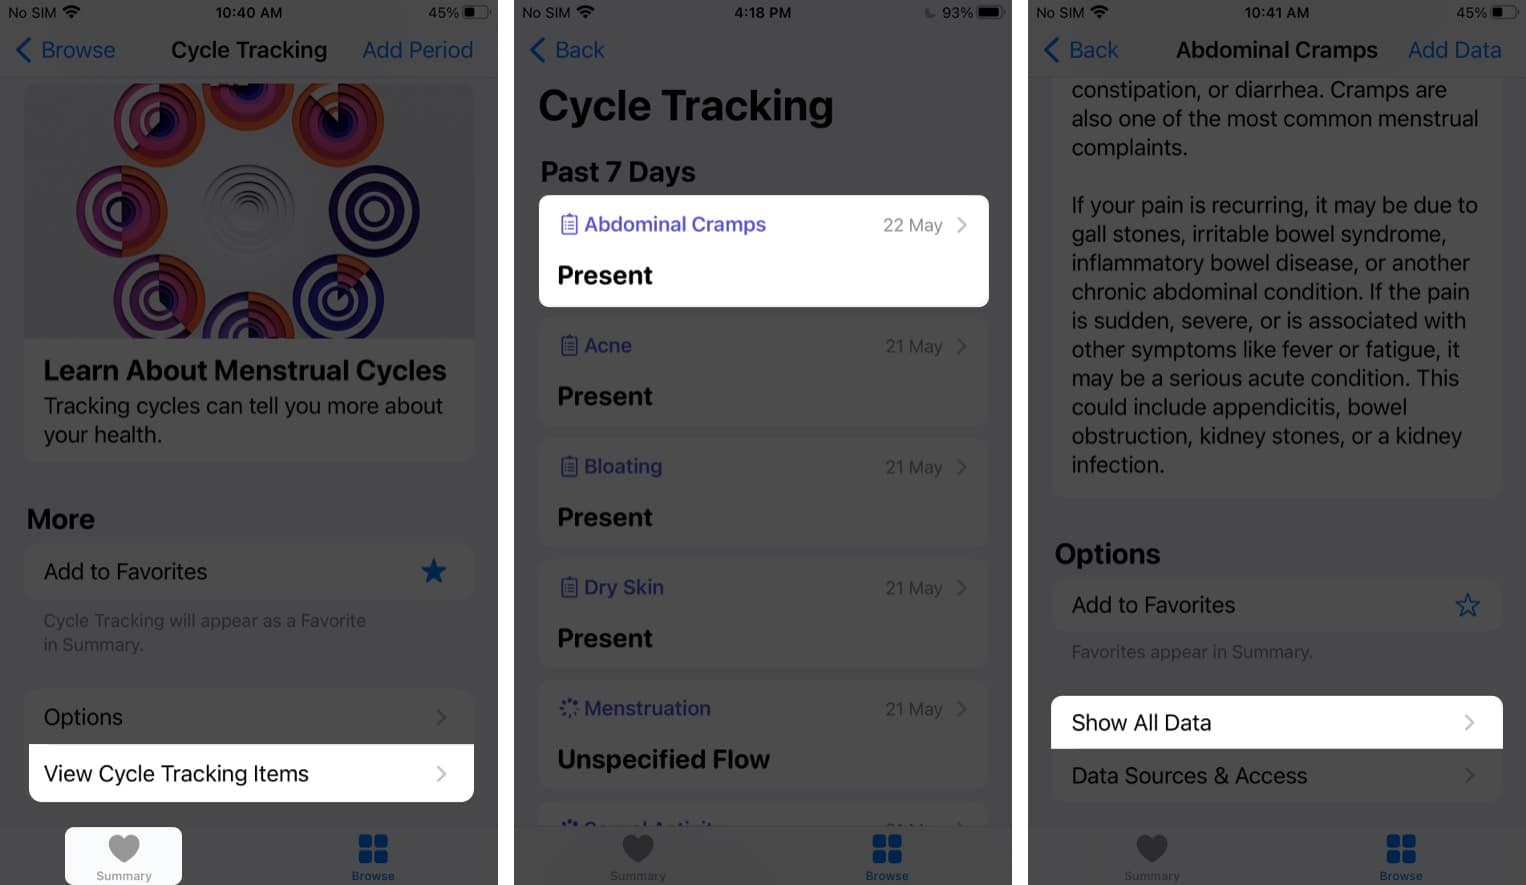 Delete Cycle Tracking data in the iPhone's Health app